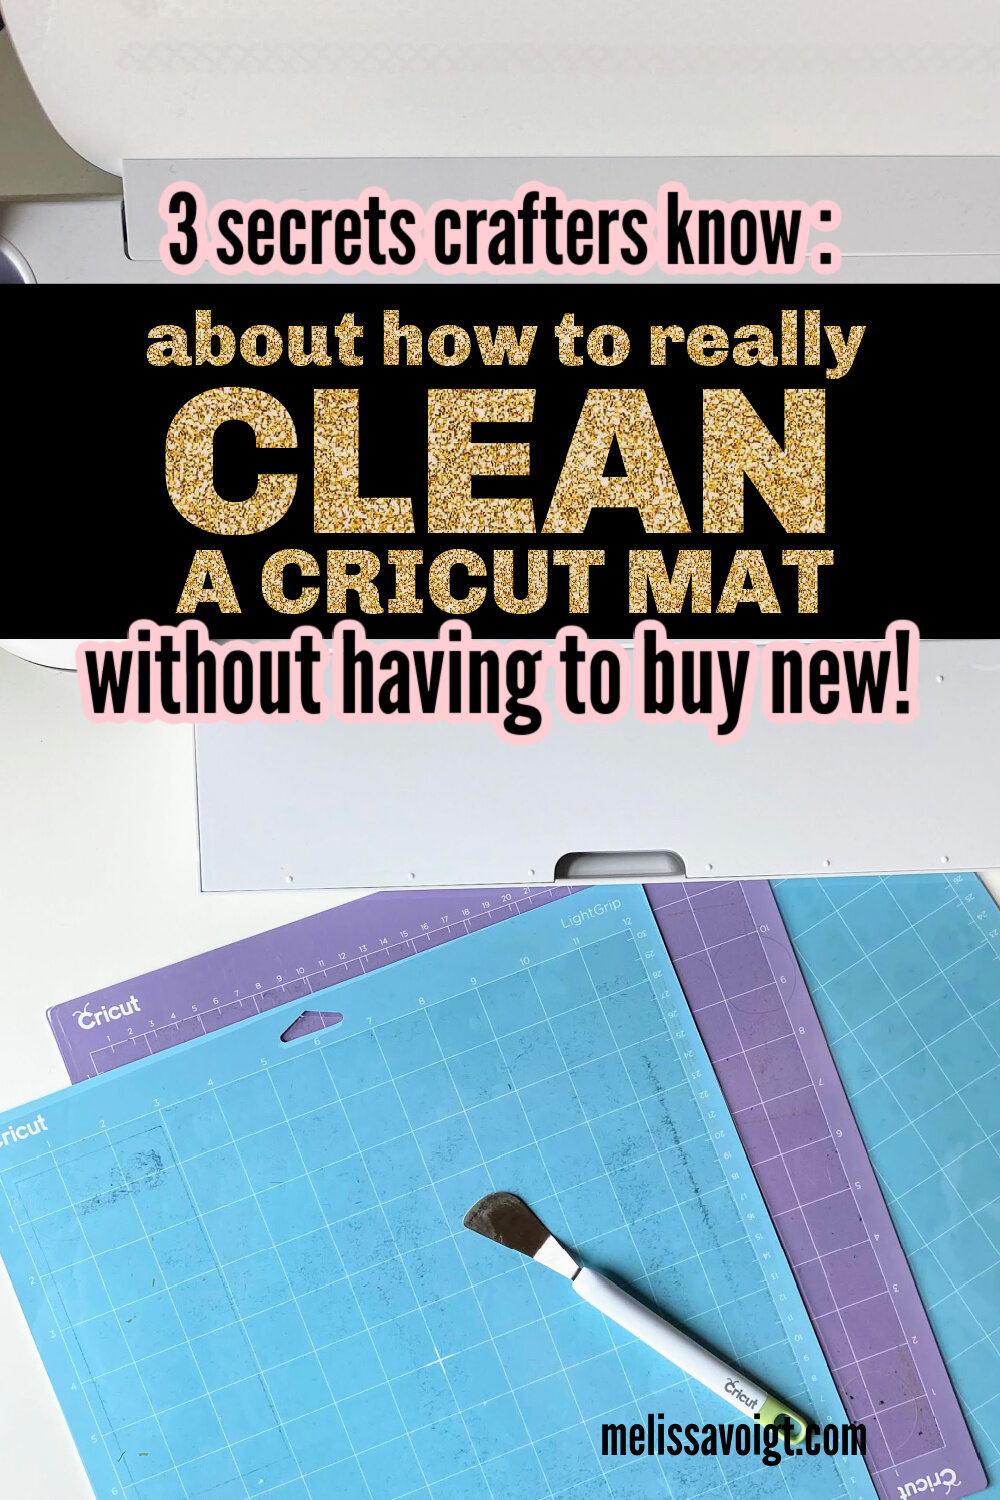 How To Clean and Restick a Cricut Mat - Conquer Your Cricut, Cameo